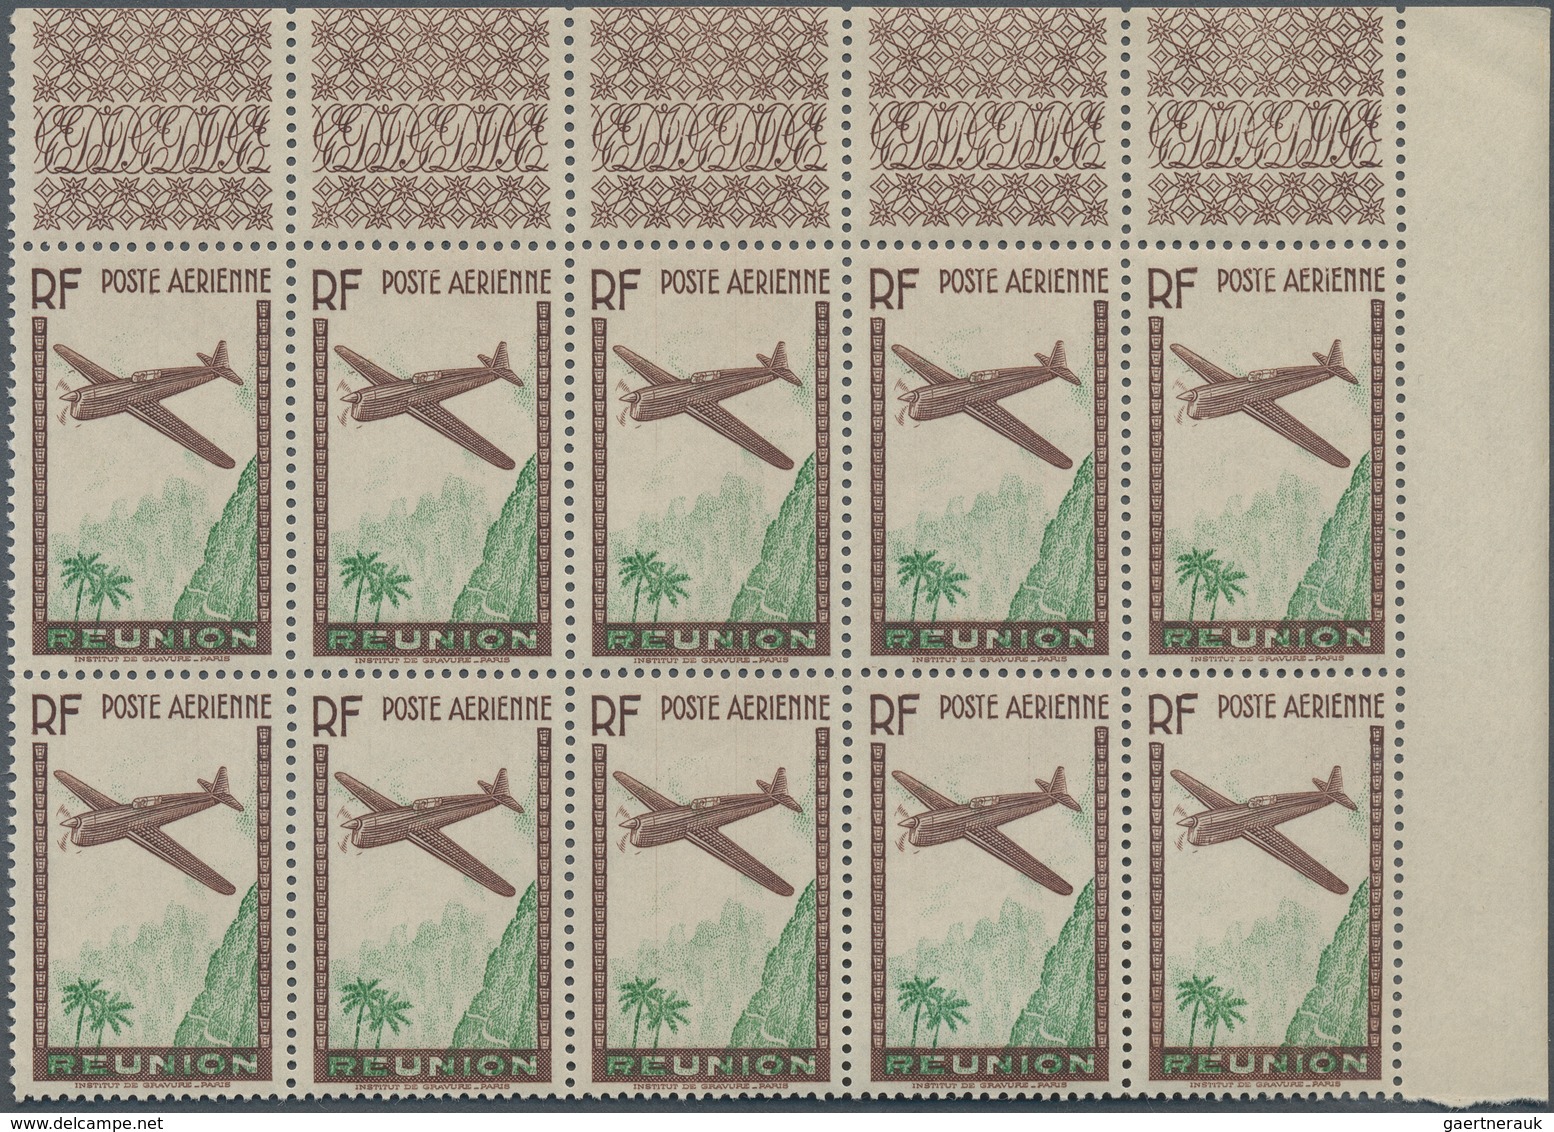 Reunion: 1938, Airmail Issue 'airplane Over Mountains' (12.65fr.) Brown/green With MISSING DENOMINAT - Oblitérés